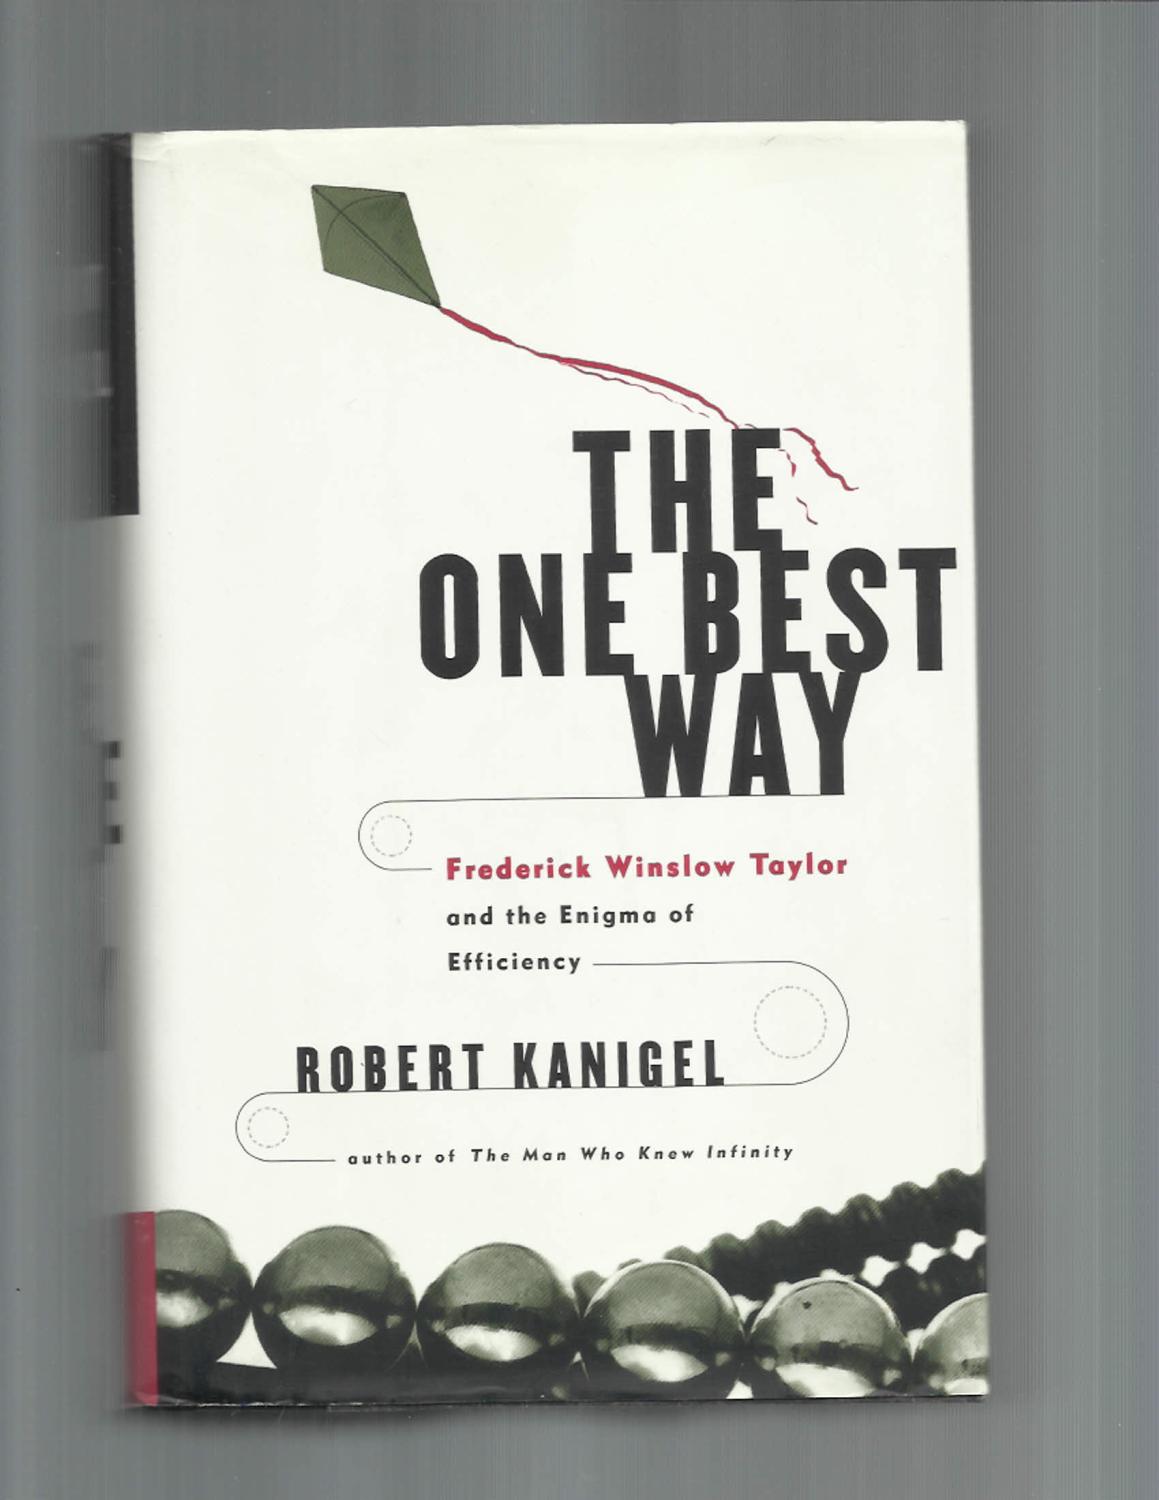 The One Best Way: Frederick Winslow Taylor and the Enigma of Efficiency (Sloan Technology Series)